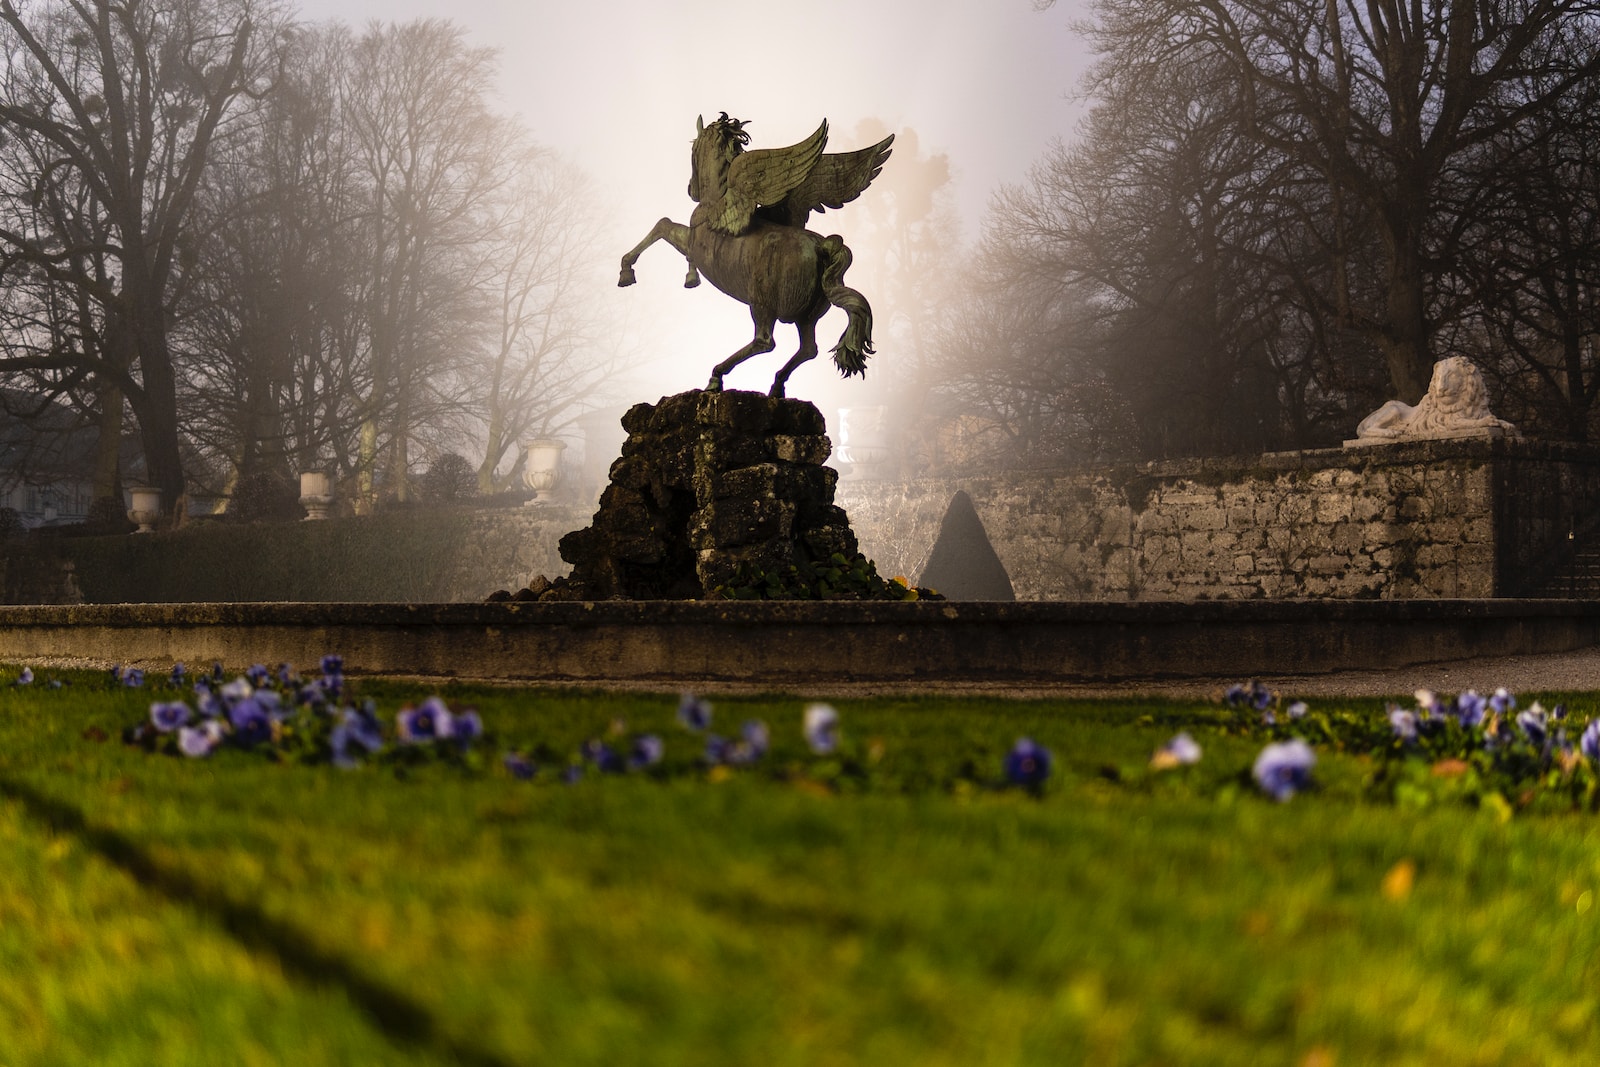 man riding horse statue on green grass field during daytime